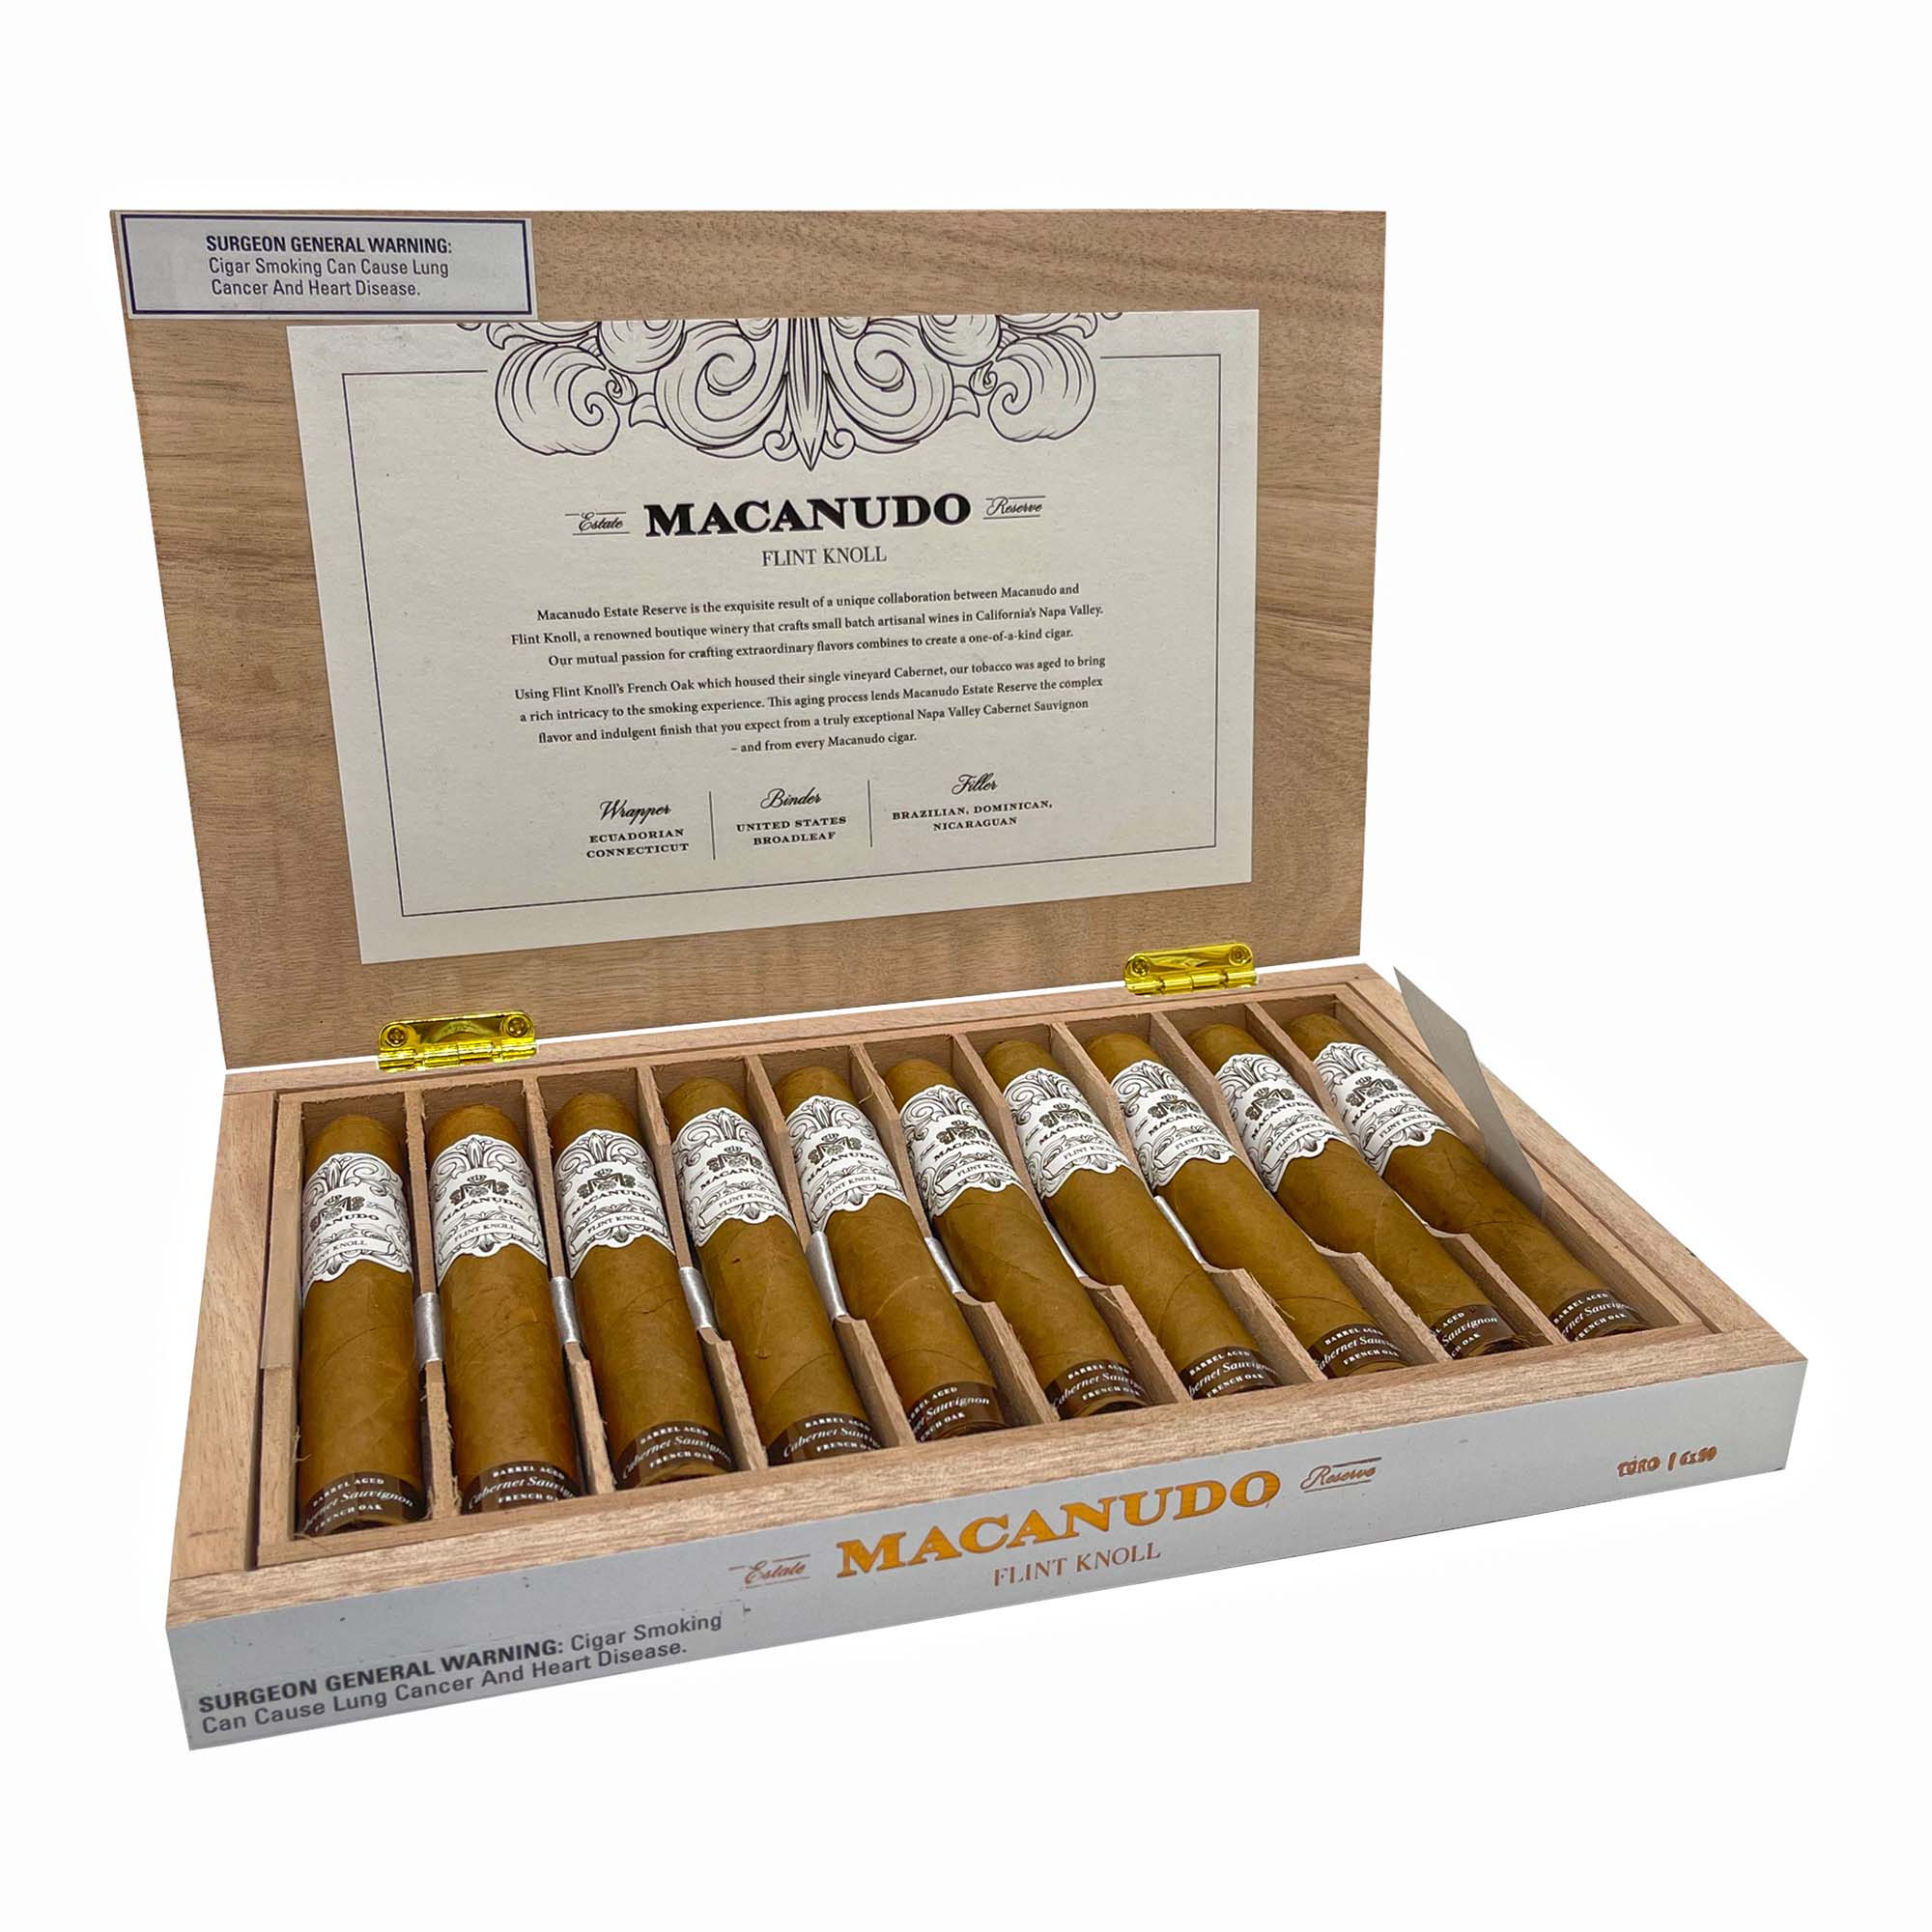 A box of Macanudo cigars, perfect for gifting to friends and family